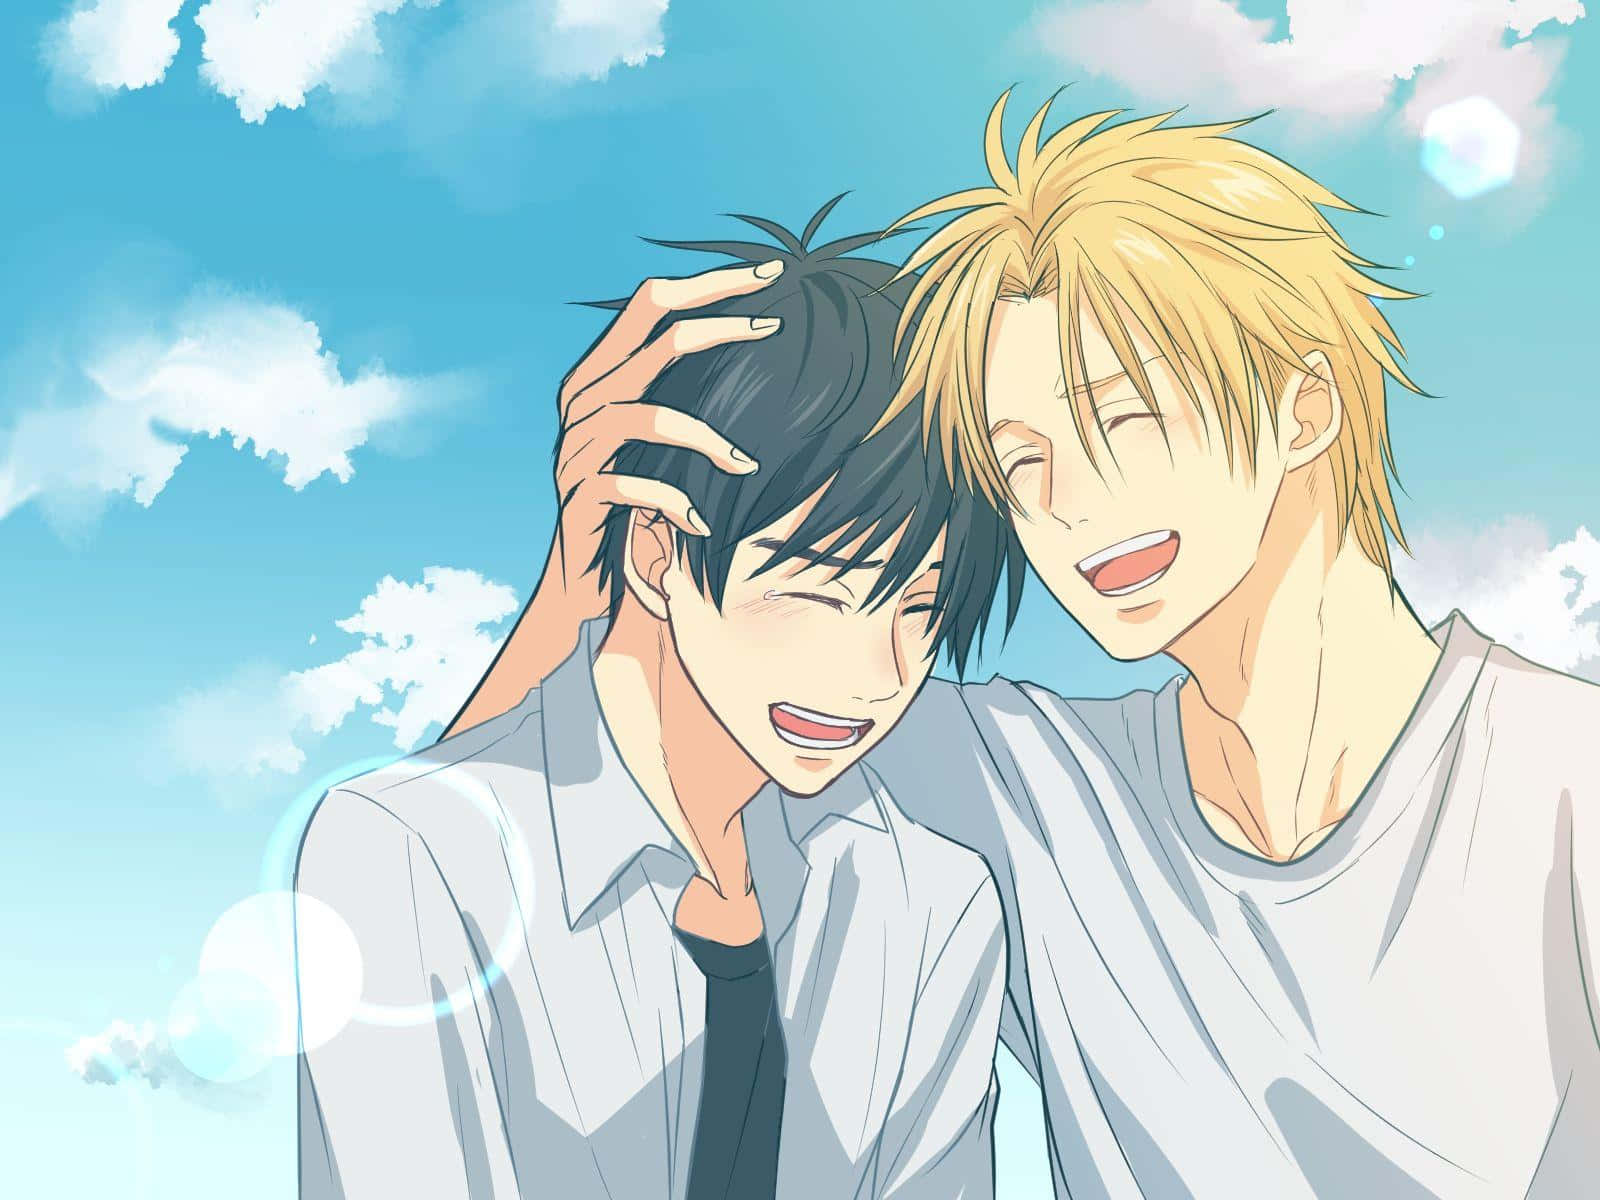 Two brothers, Ash and Eiji, from the popular manga series Banana Fish